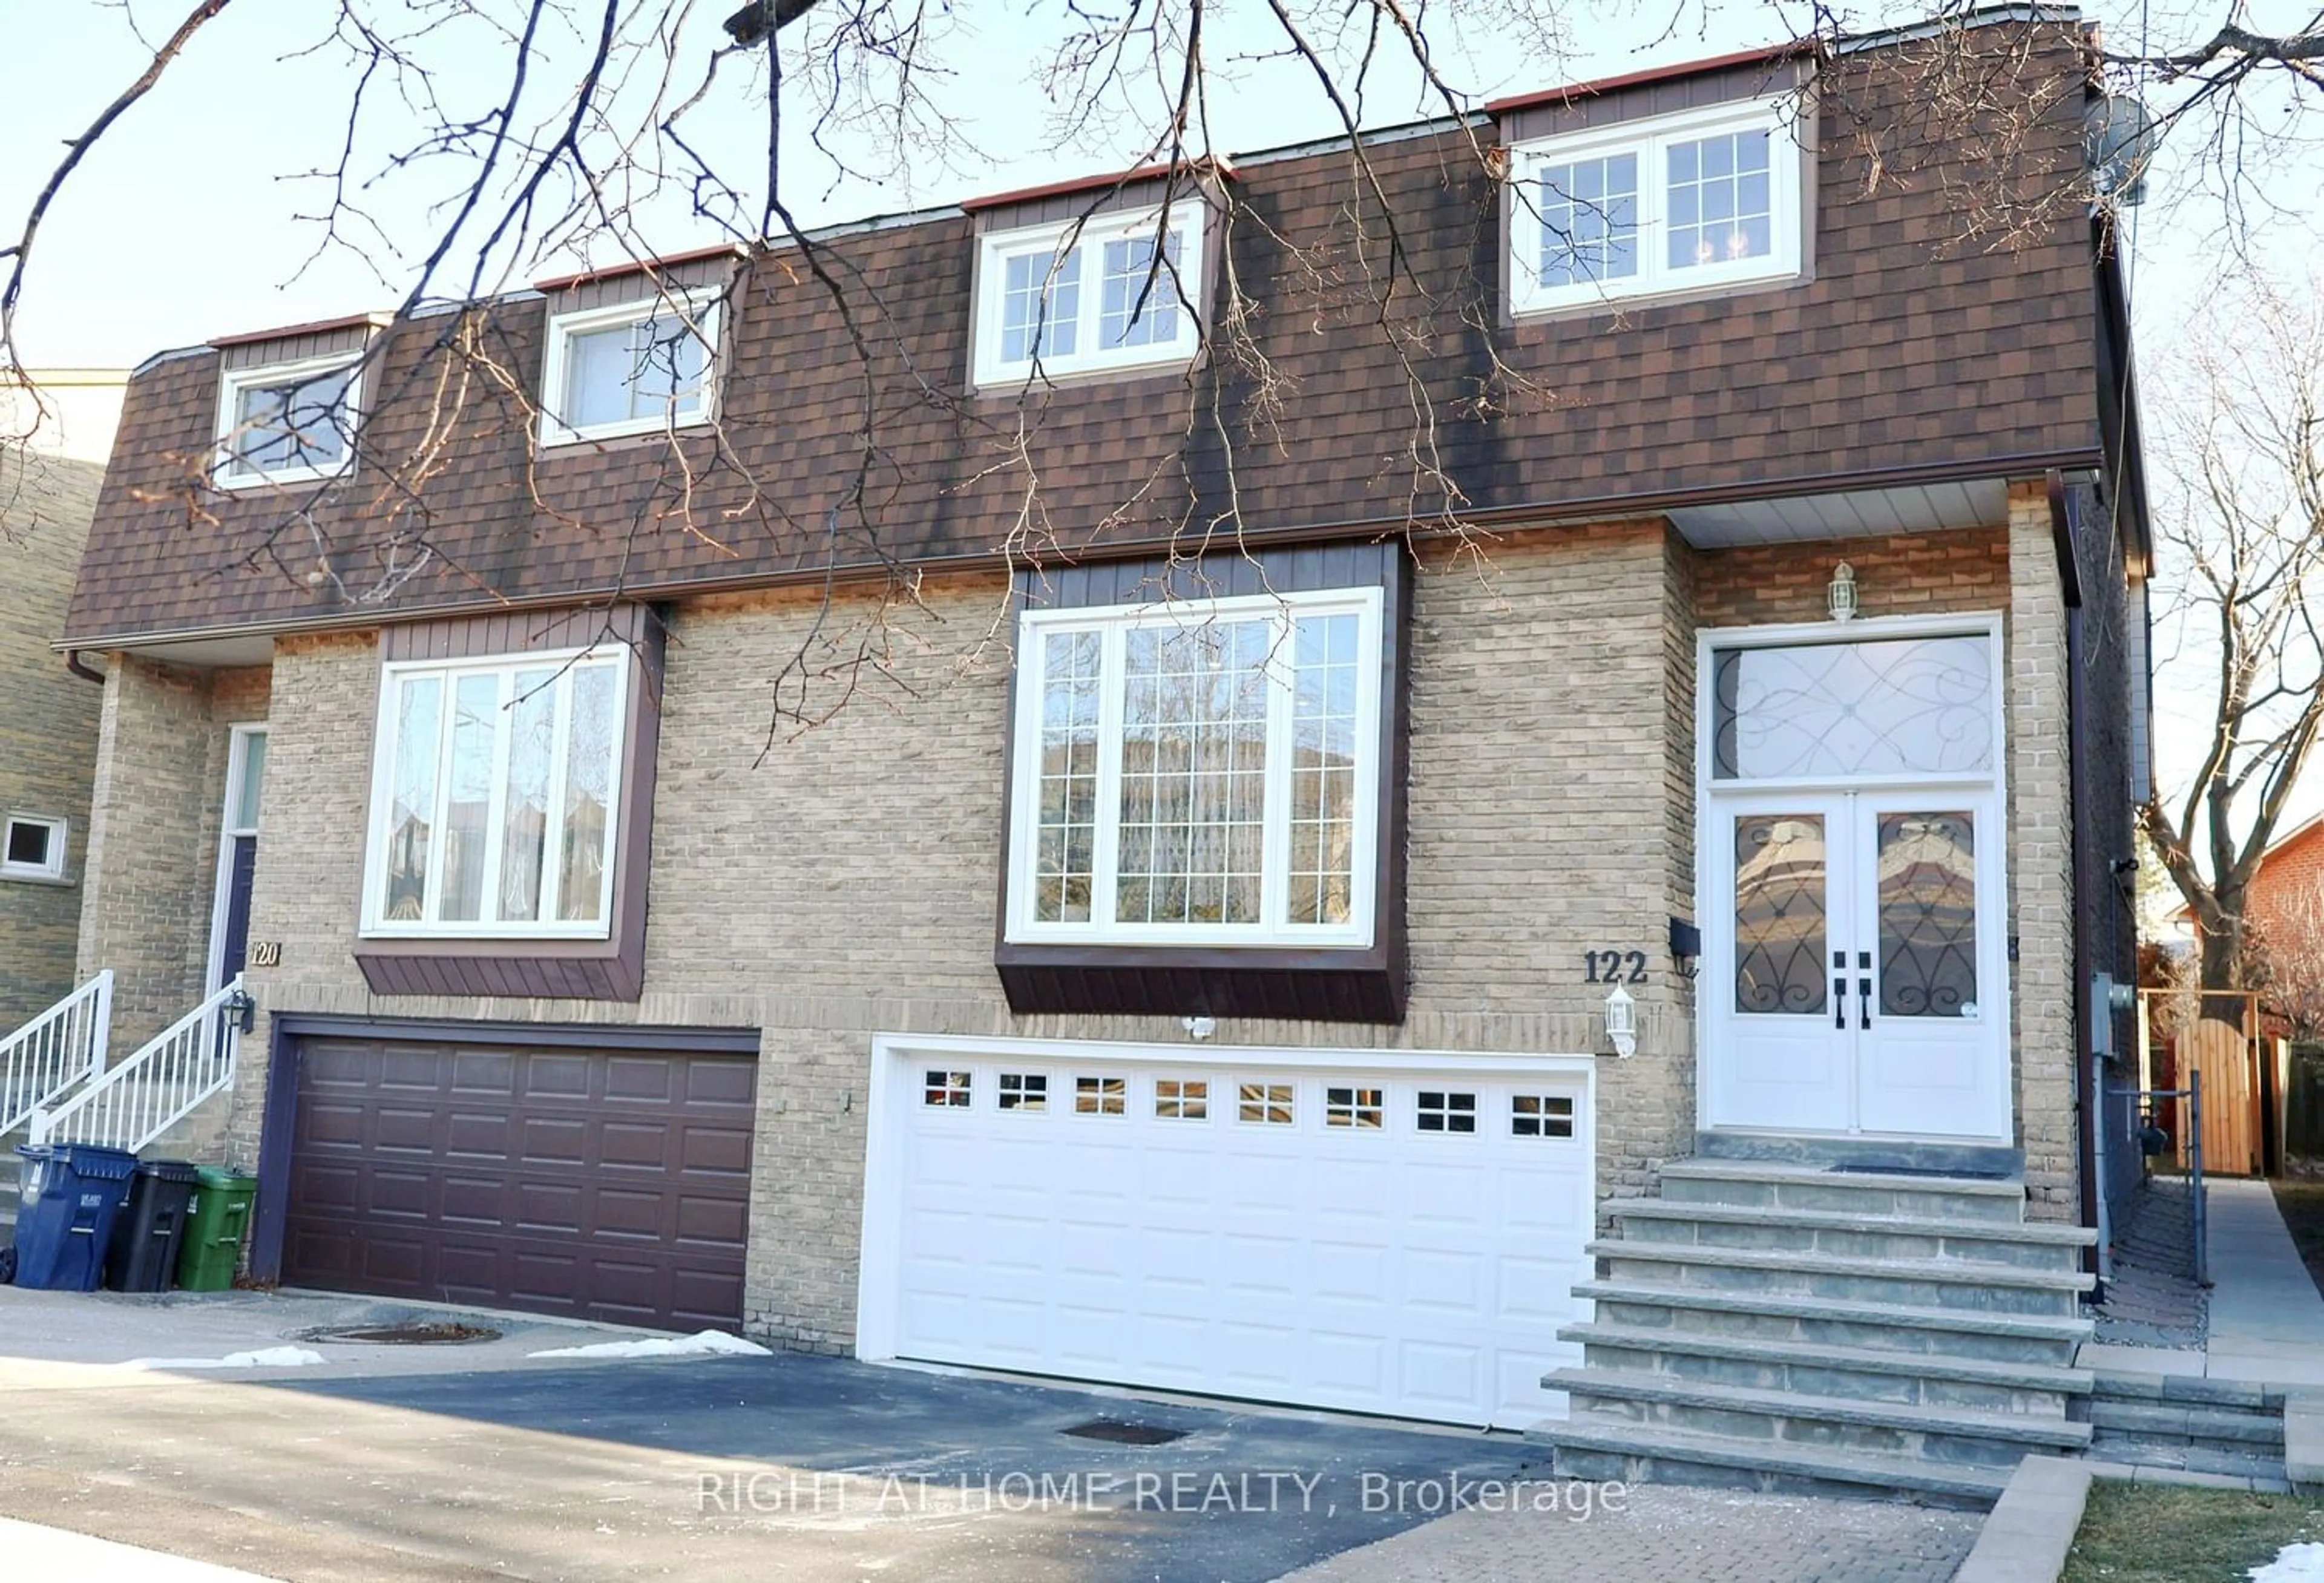 Home with brick exterior material for 122 Dollery Crt, Toronto Ontario M2R 3P1